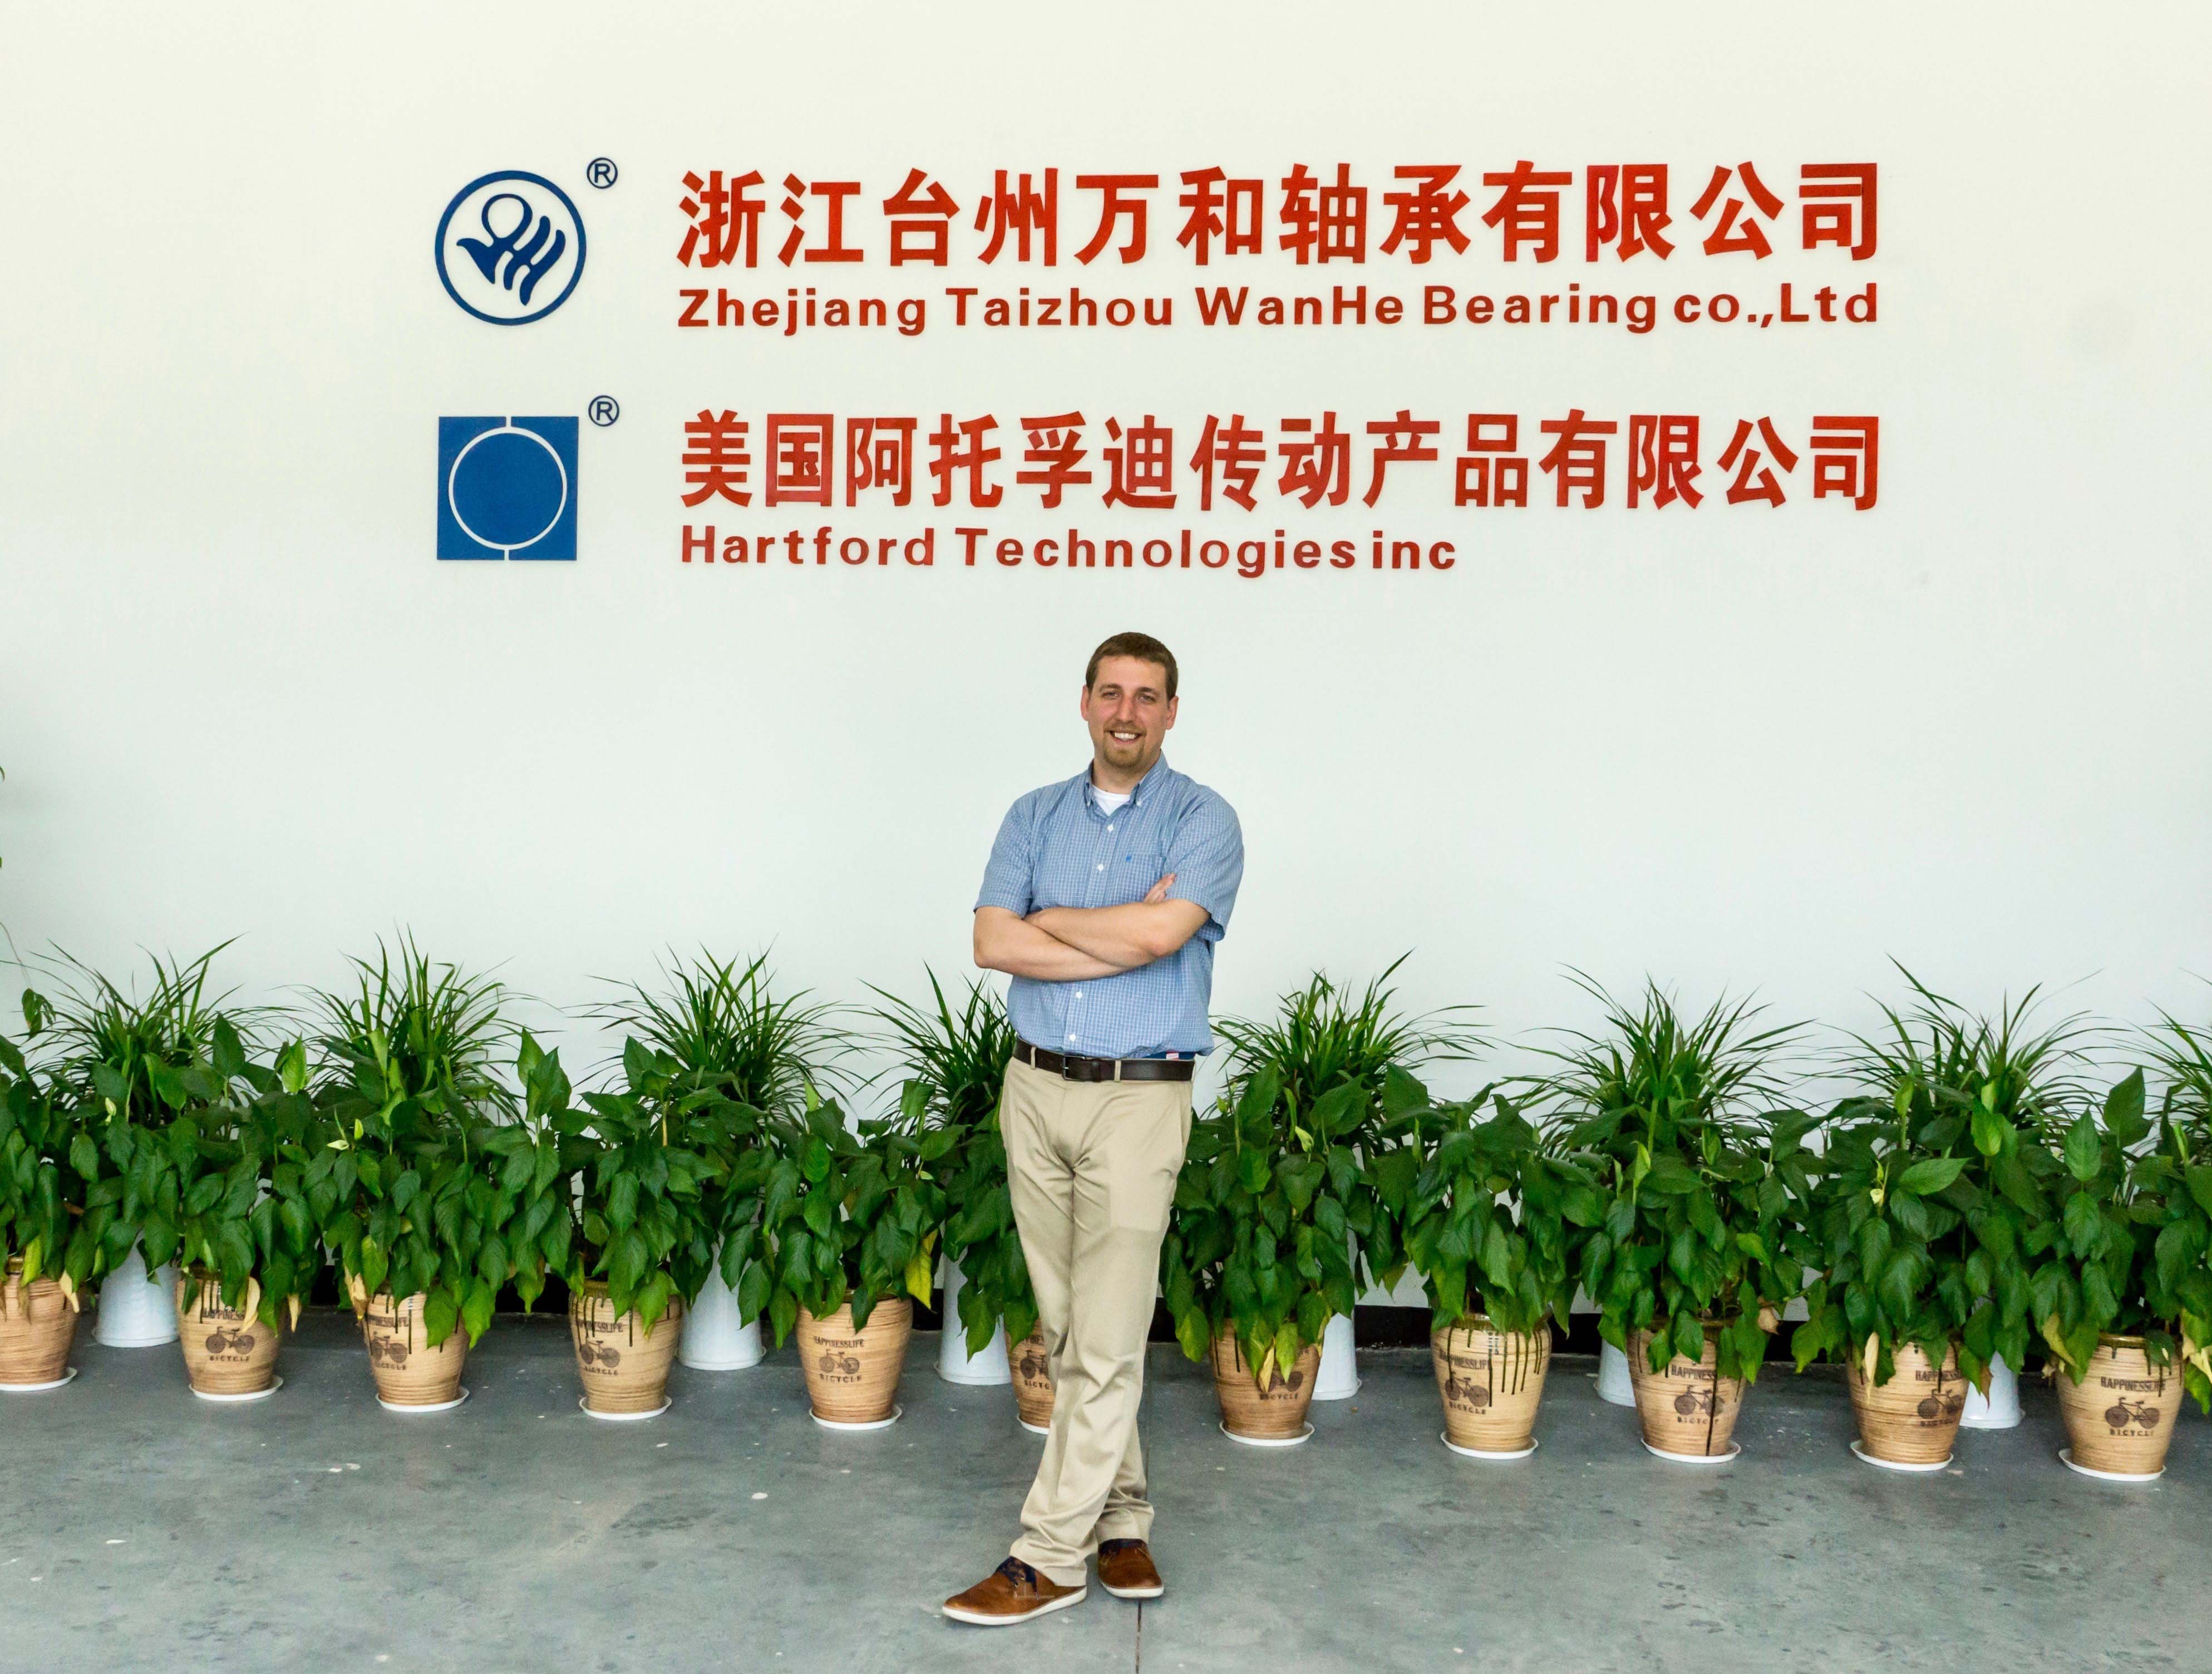 Jordan Greenlee (Class of 2019) traveled to Shanghai as part of his internship with Hartford Technologies